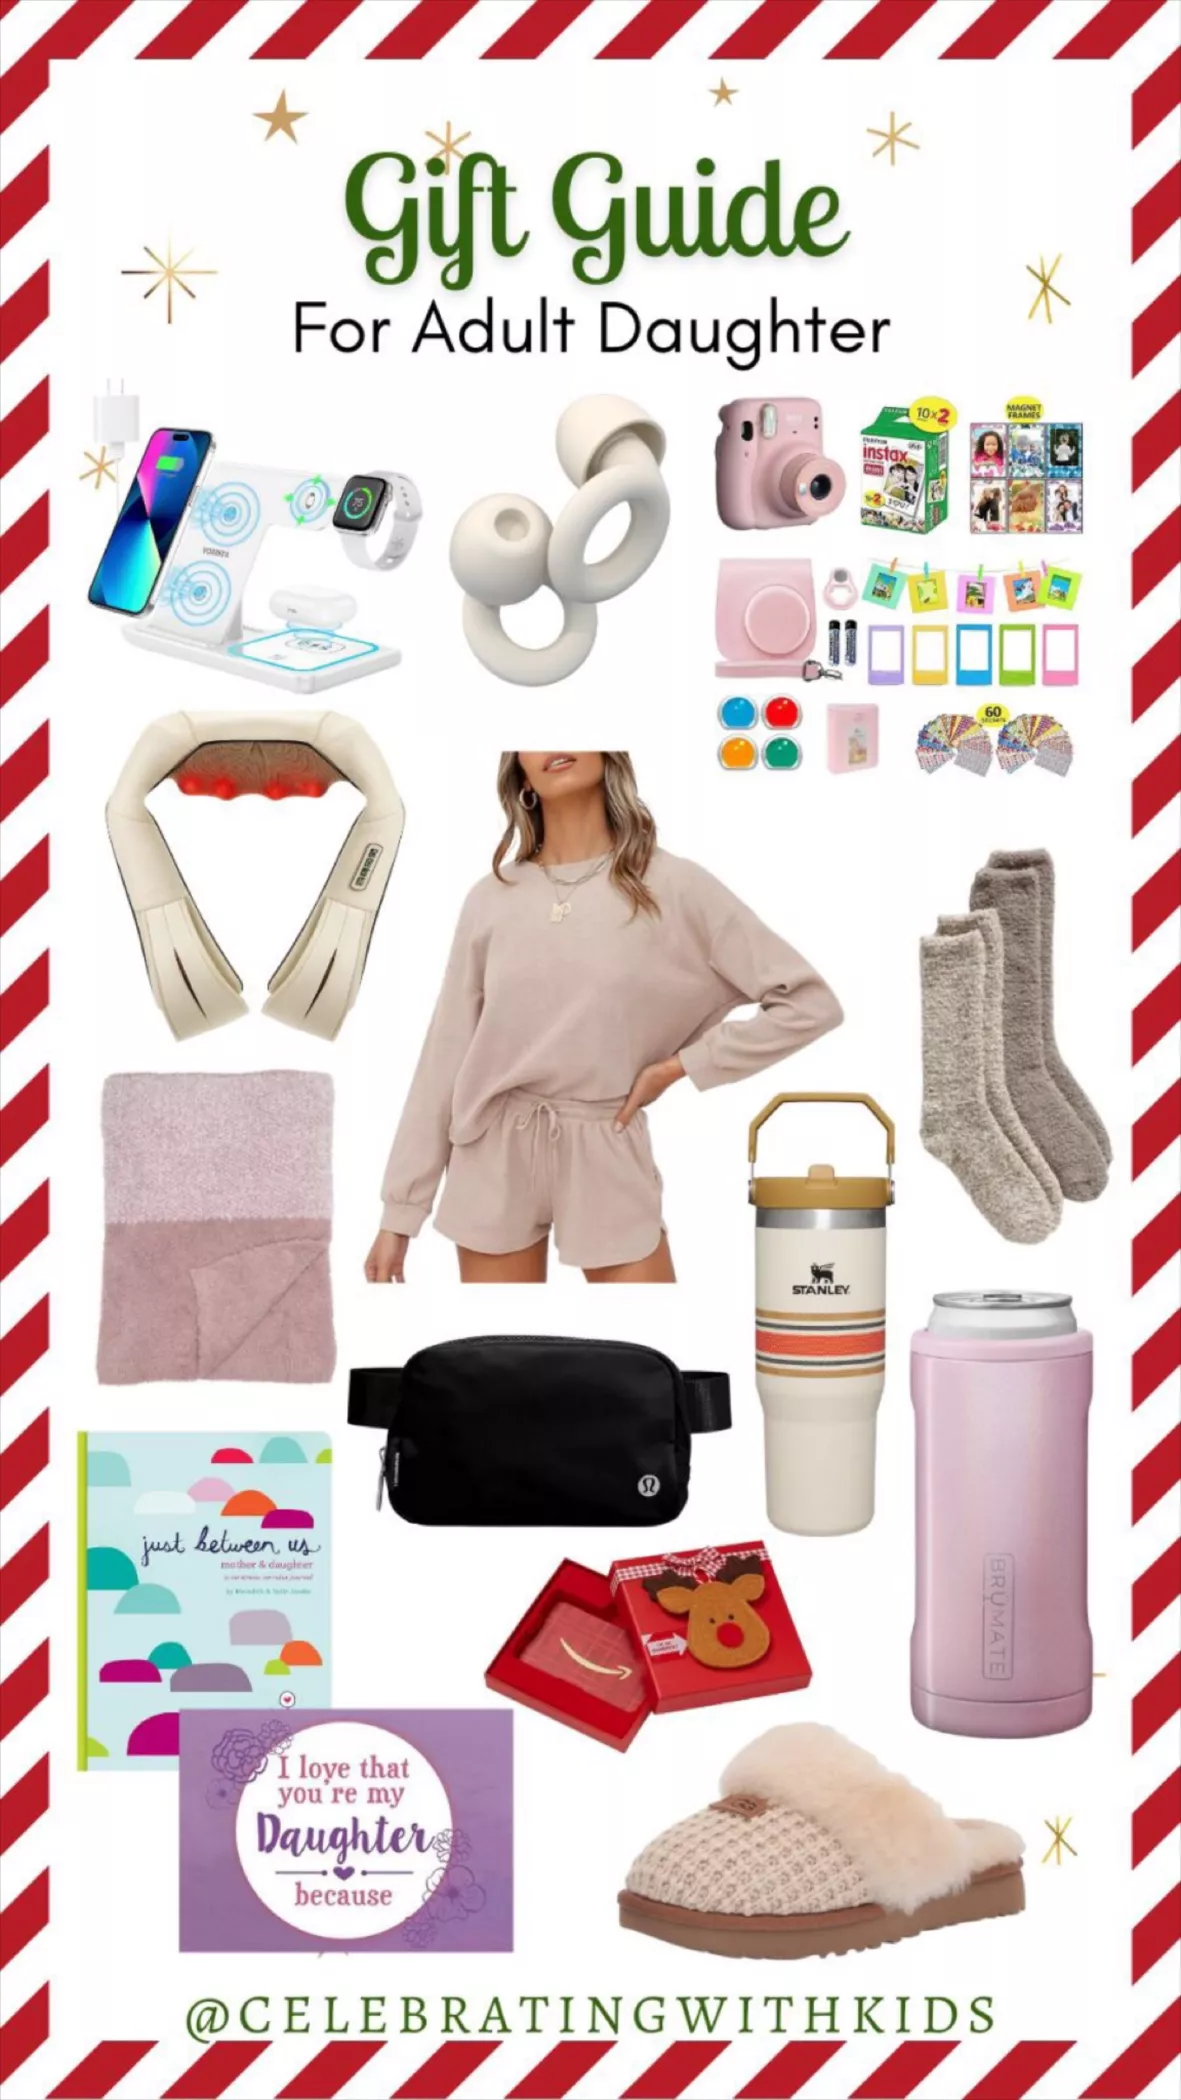 Gifts Ideas for an Adult Daughter